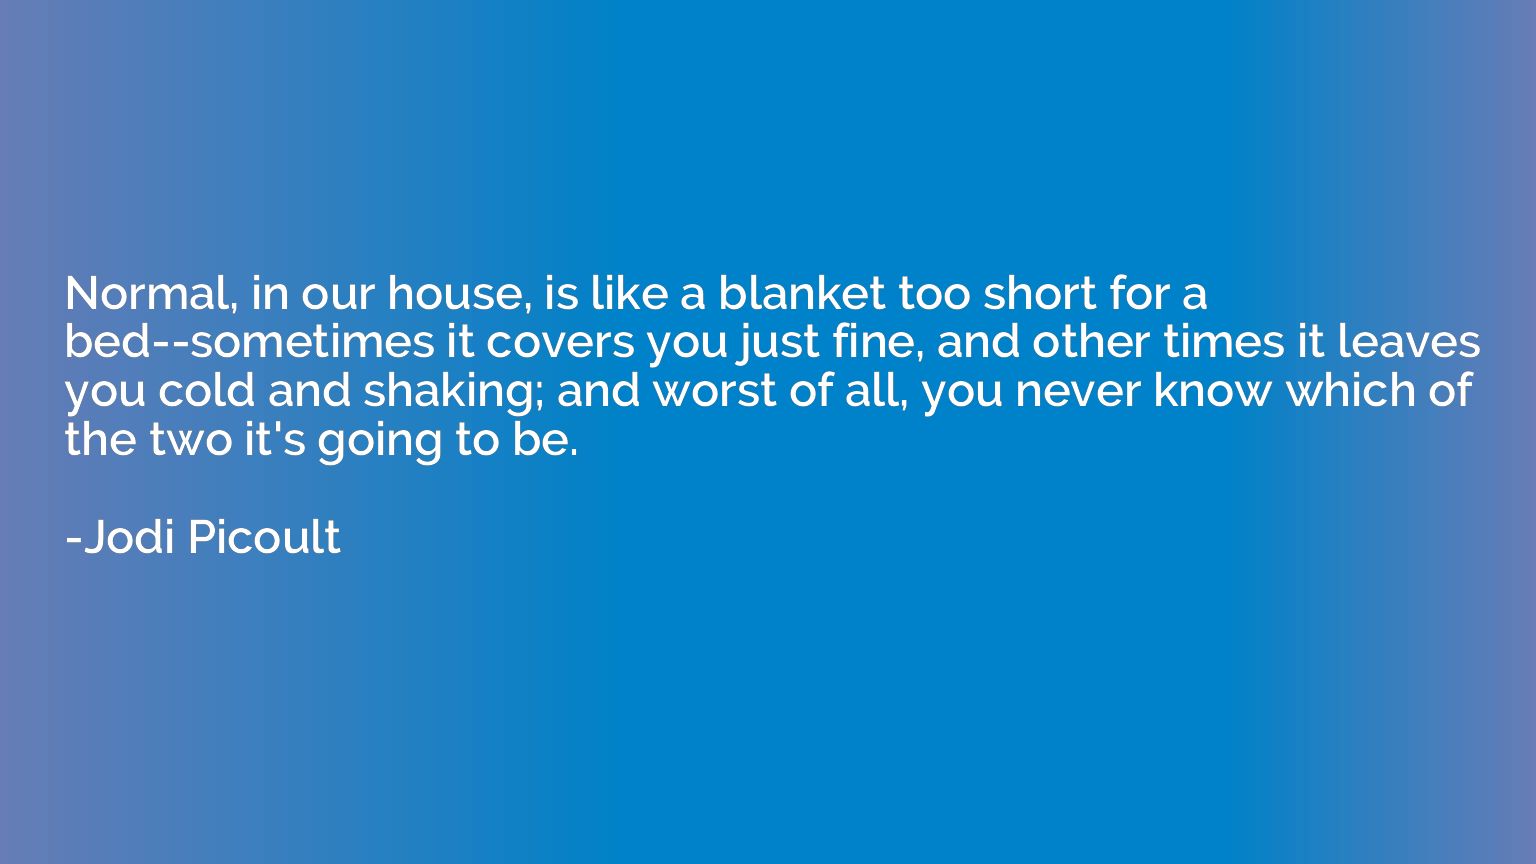 Normal, in our house, is like a blanket too short for a bed-